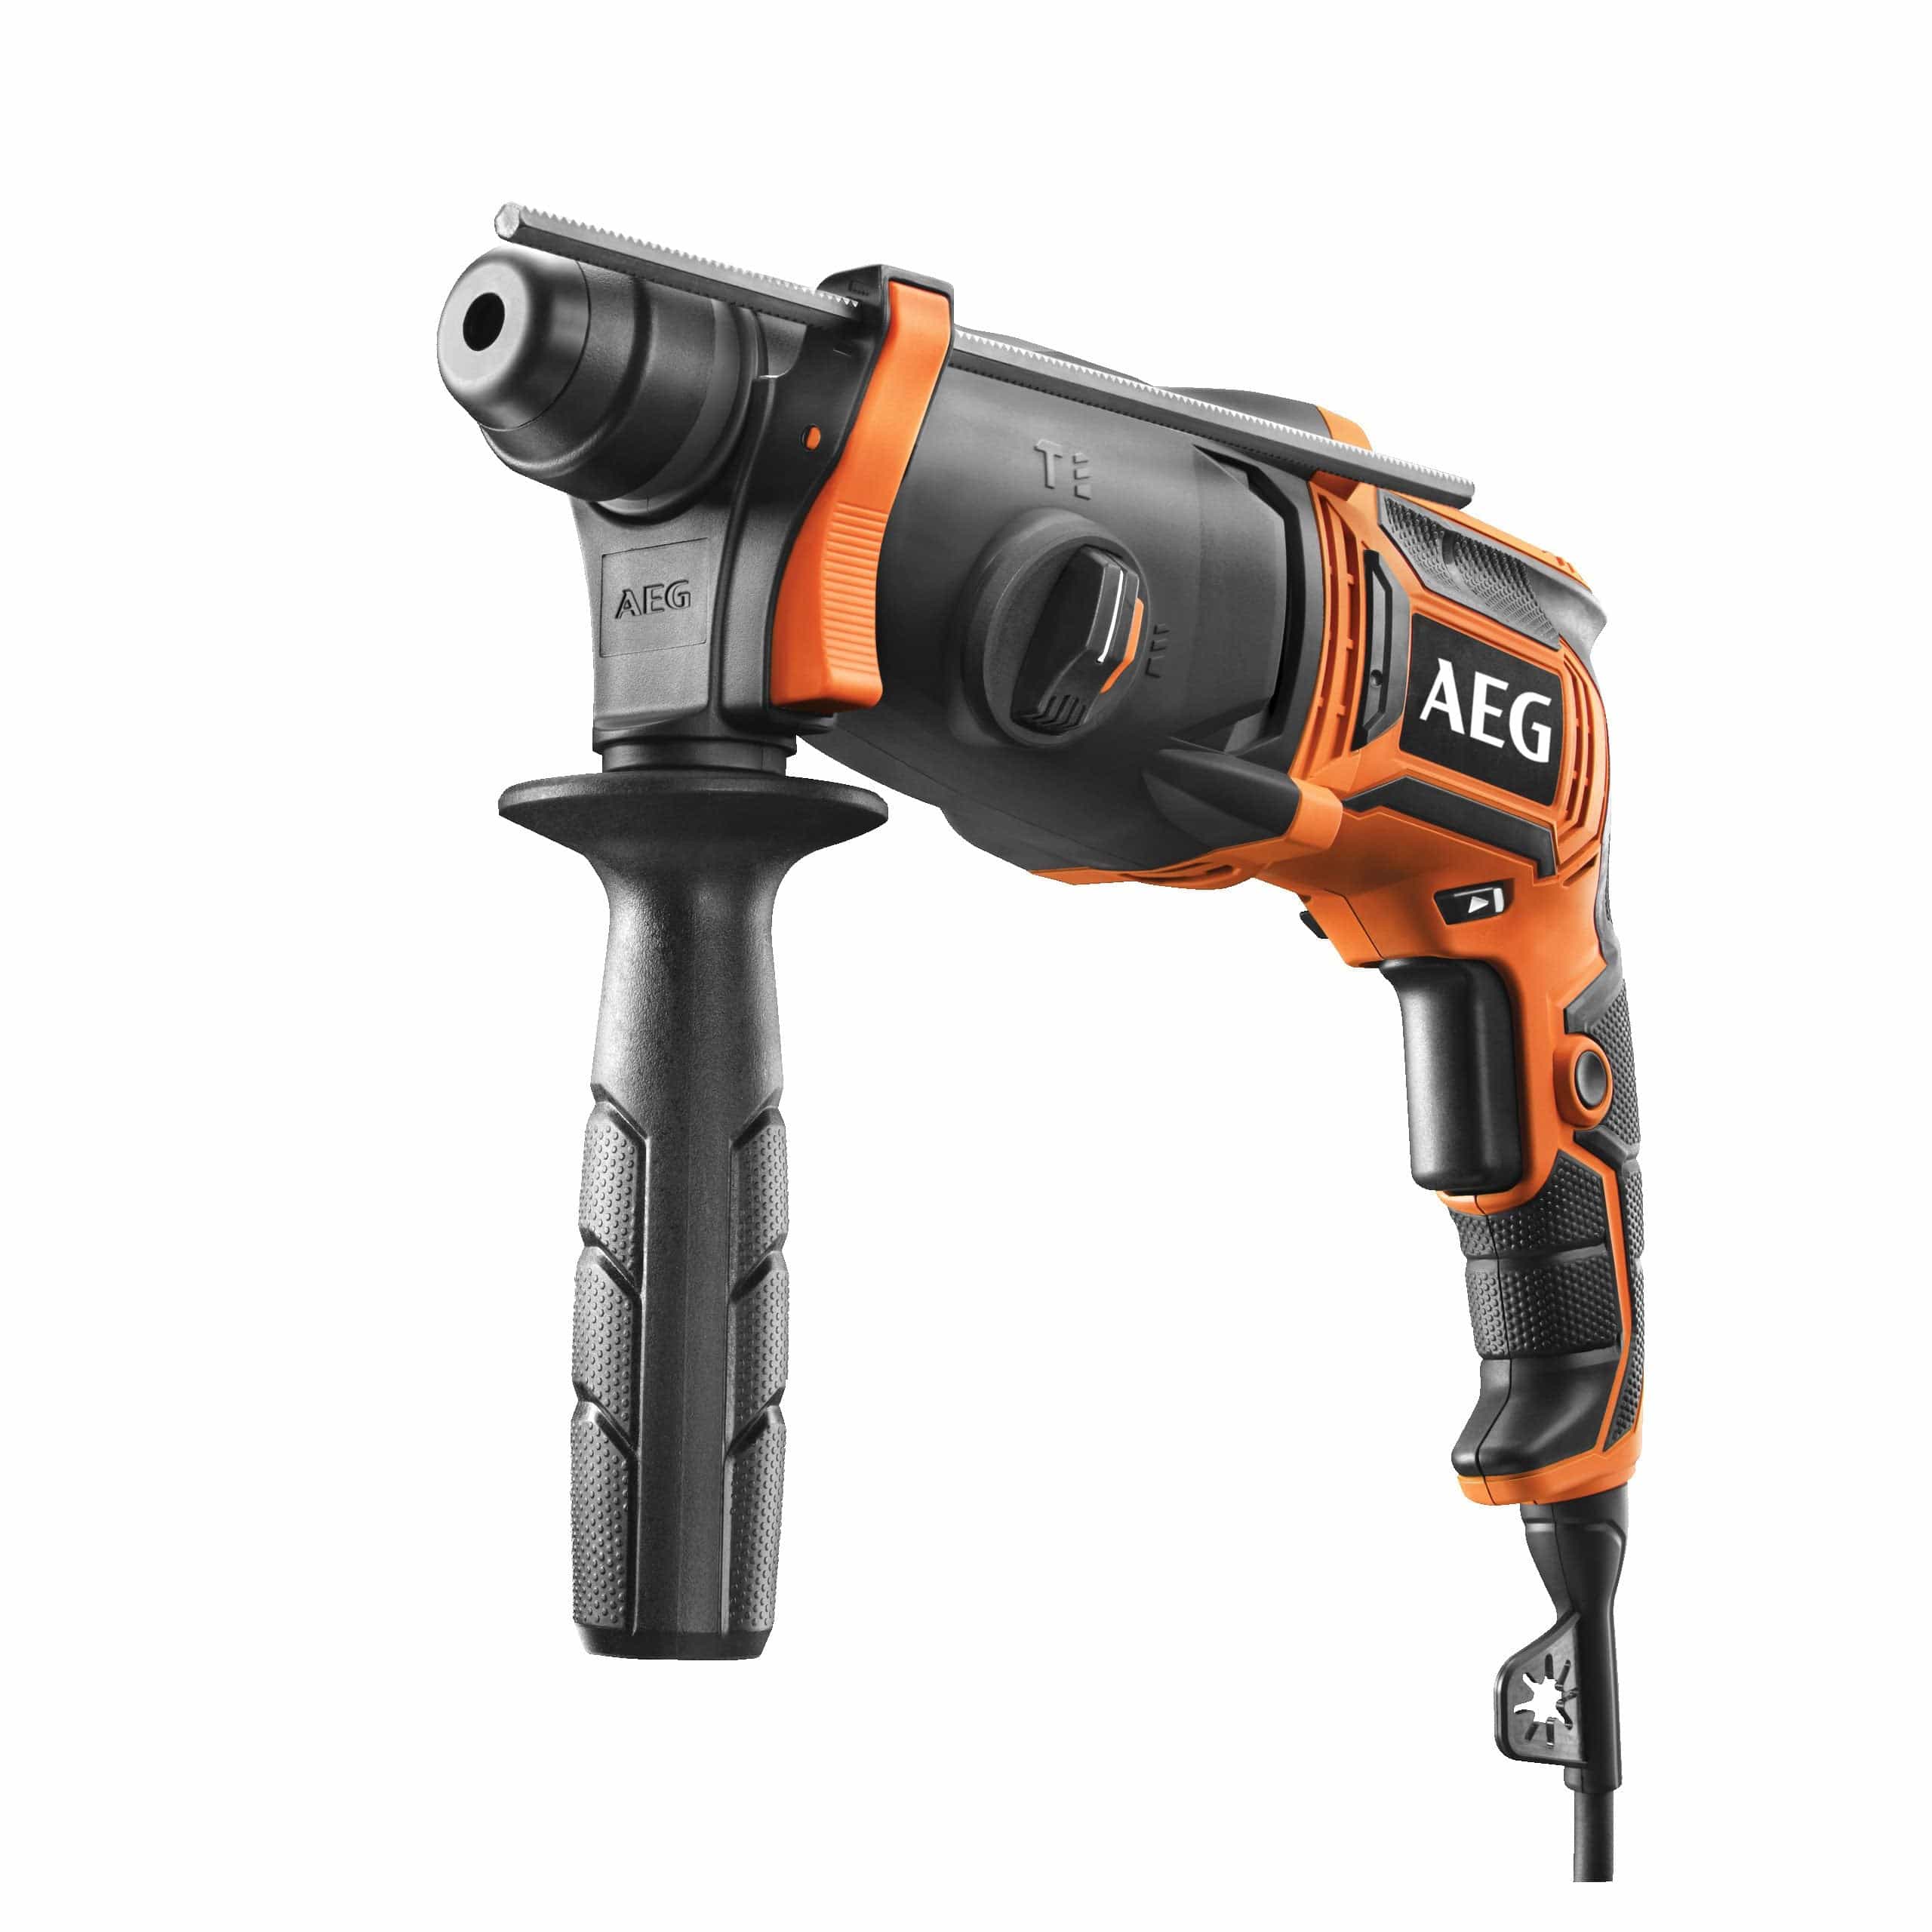 AEG 800W SDS-Plus Combi Hammer Drill - BH24IE | Supply Master Accra, Ghana Drill Buy Tools hardware Building materials